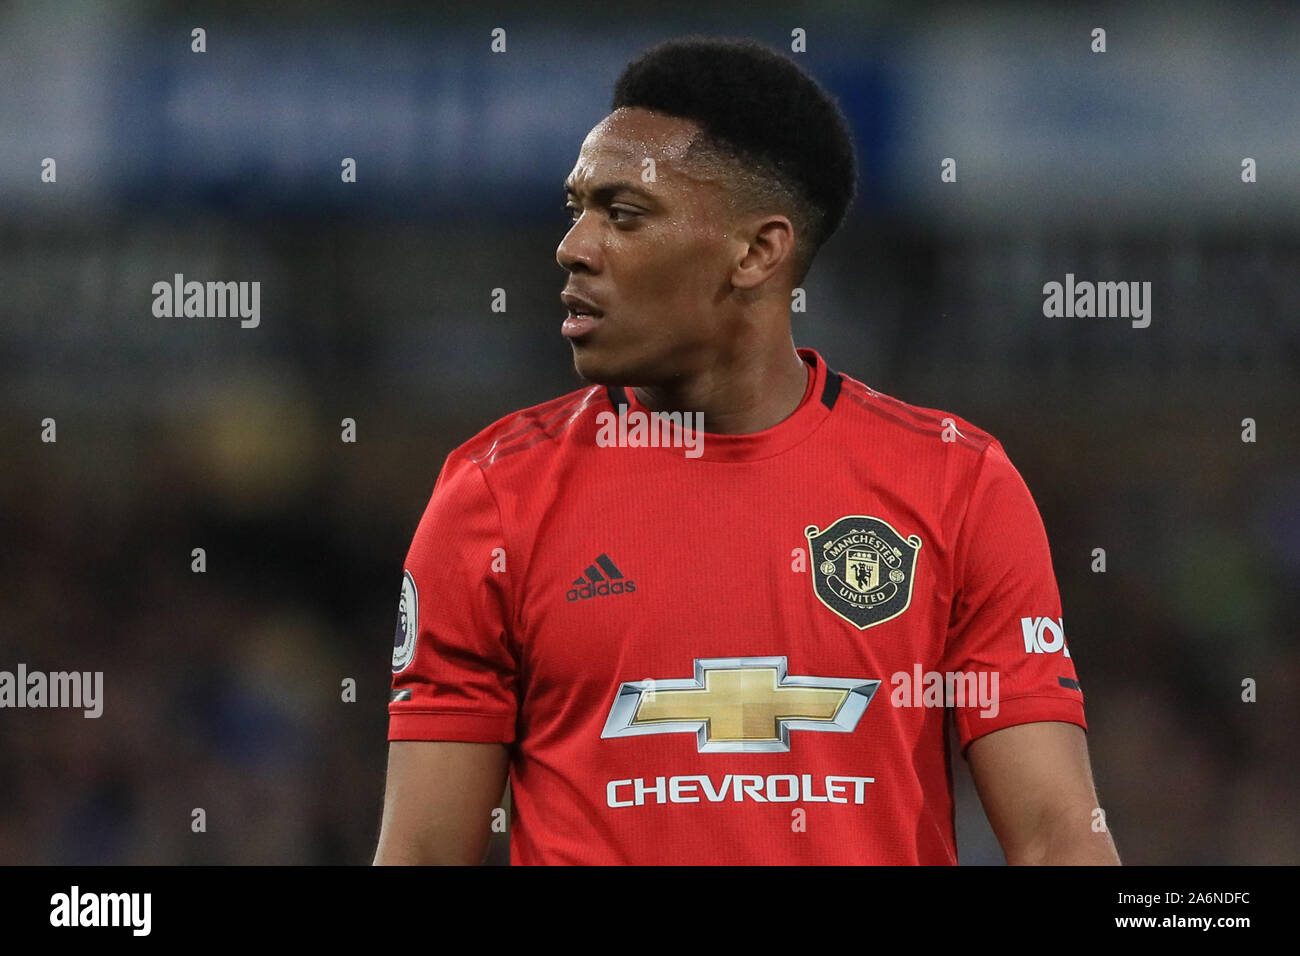 27th October 2019, Carrow Road, Norwich, England; Premier League, Norwich City v Manchester United : Anthony Martial (9) of Manchester United during the game Credit: Mark Cosgrove/News Images Stock Photo